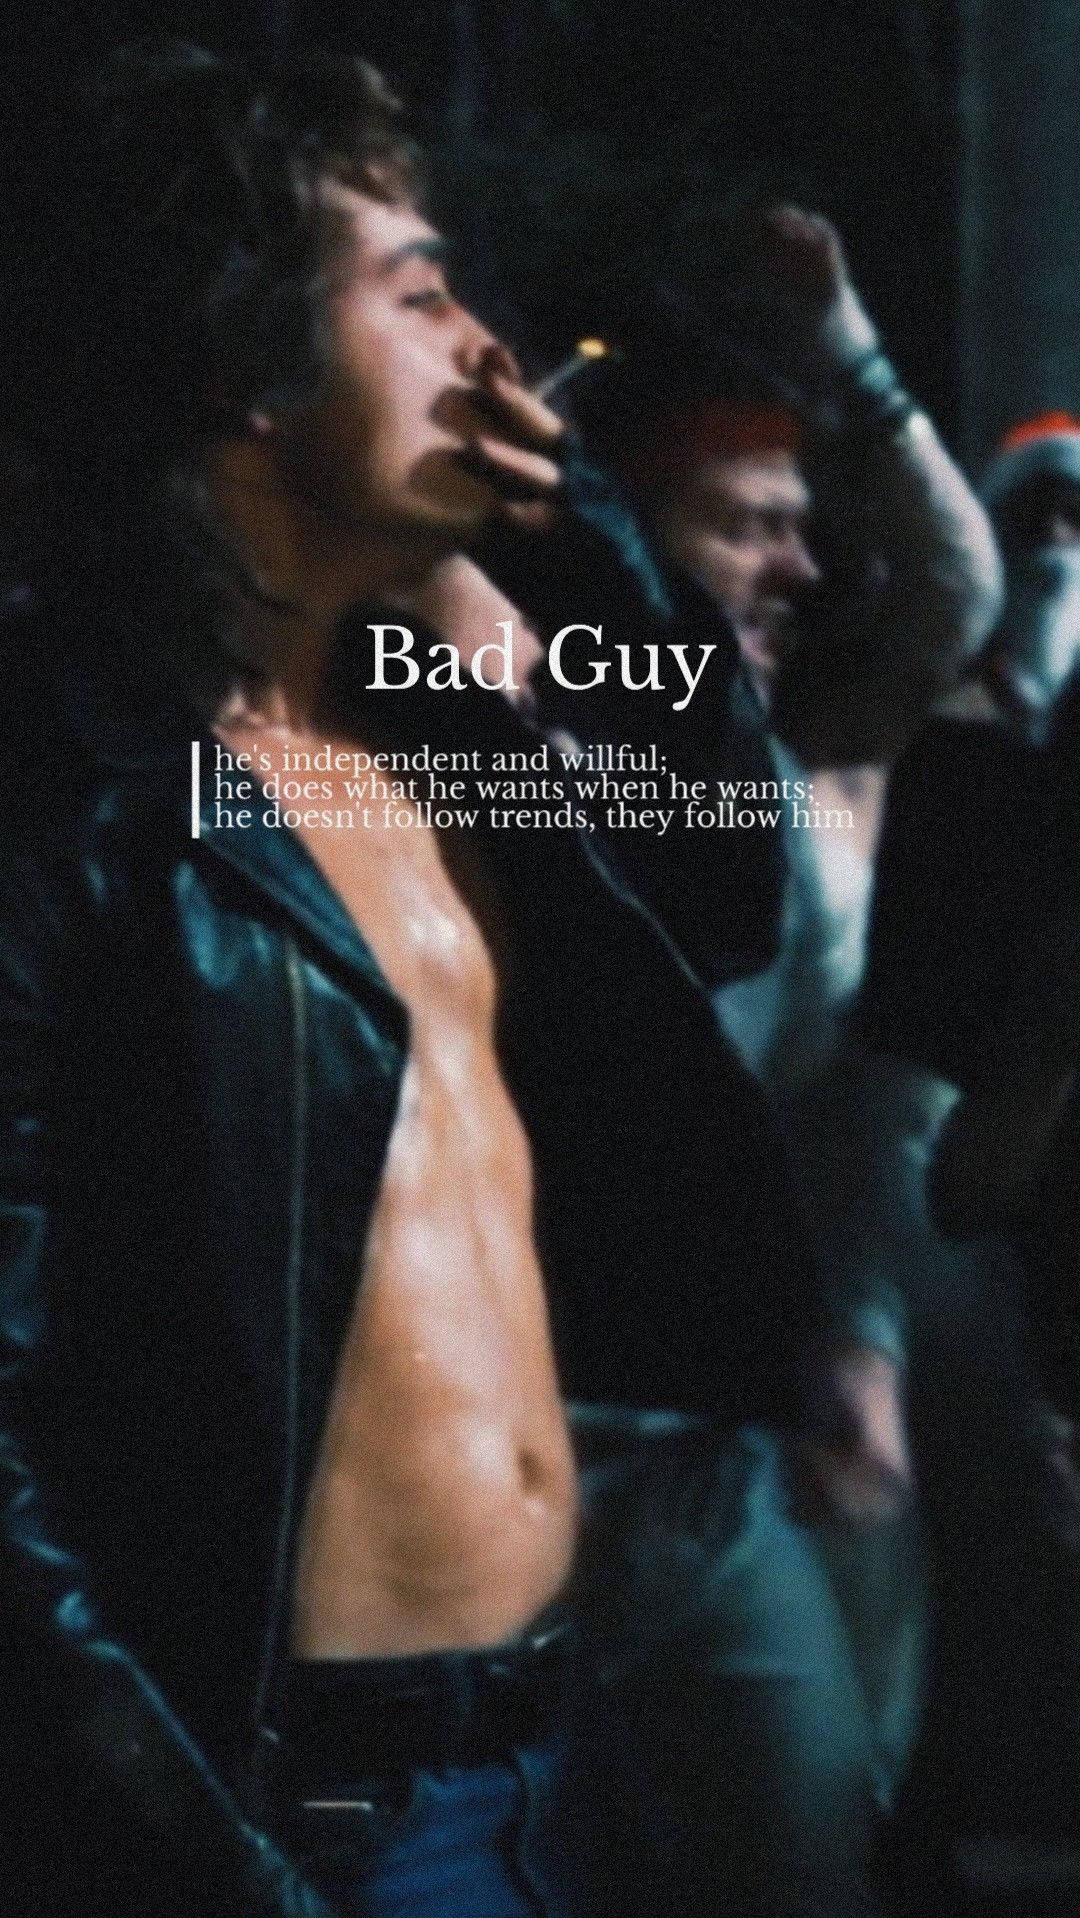 Bad Guy Poster Of Billy Hargrove